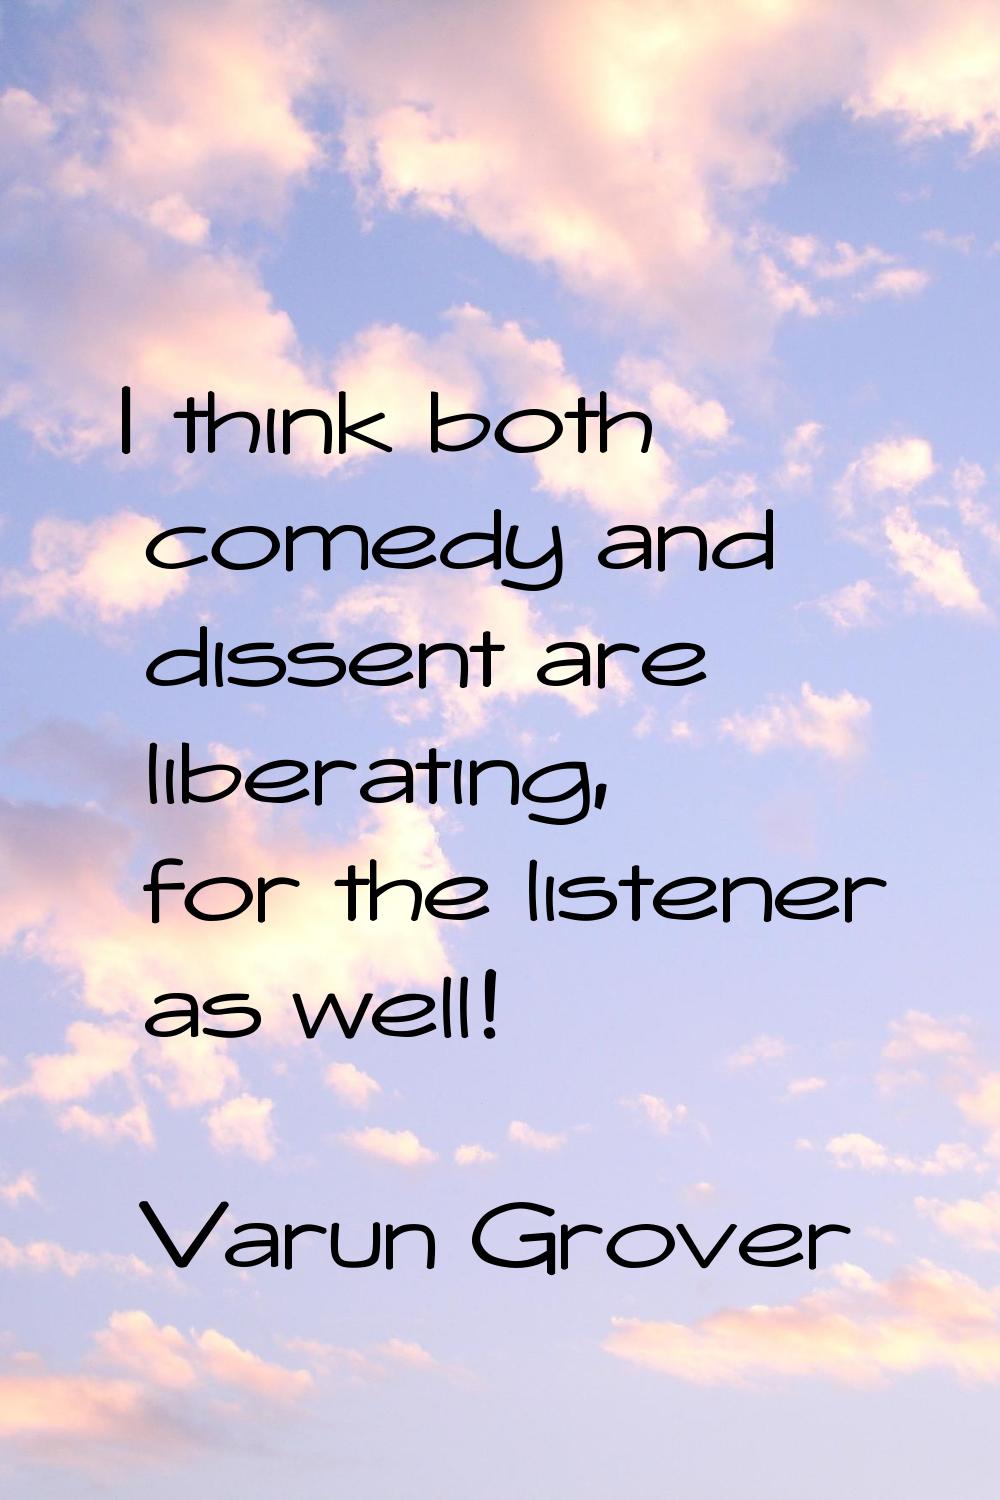 I think both comedy and dissent are liberating, for the listener as well!